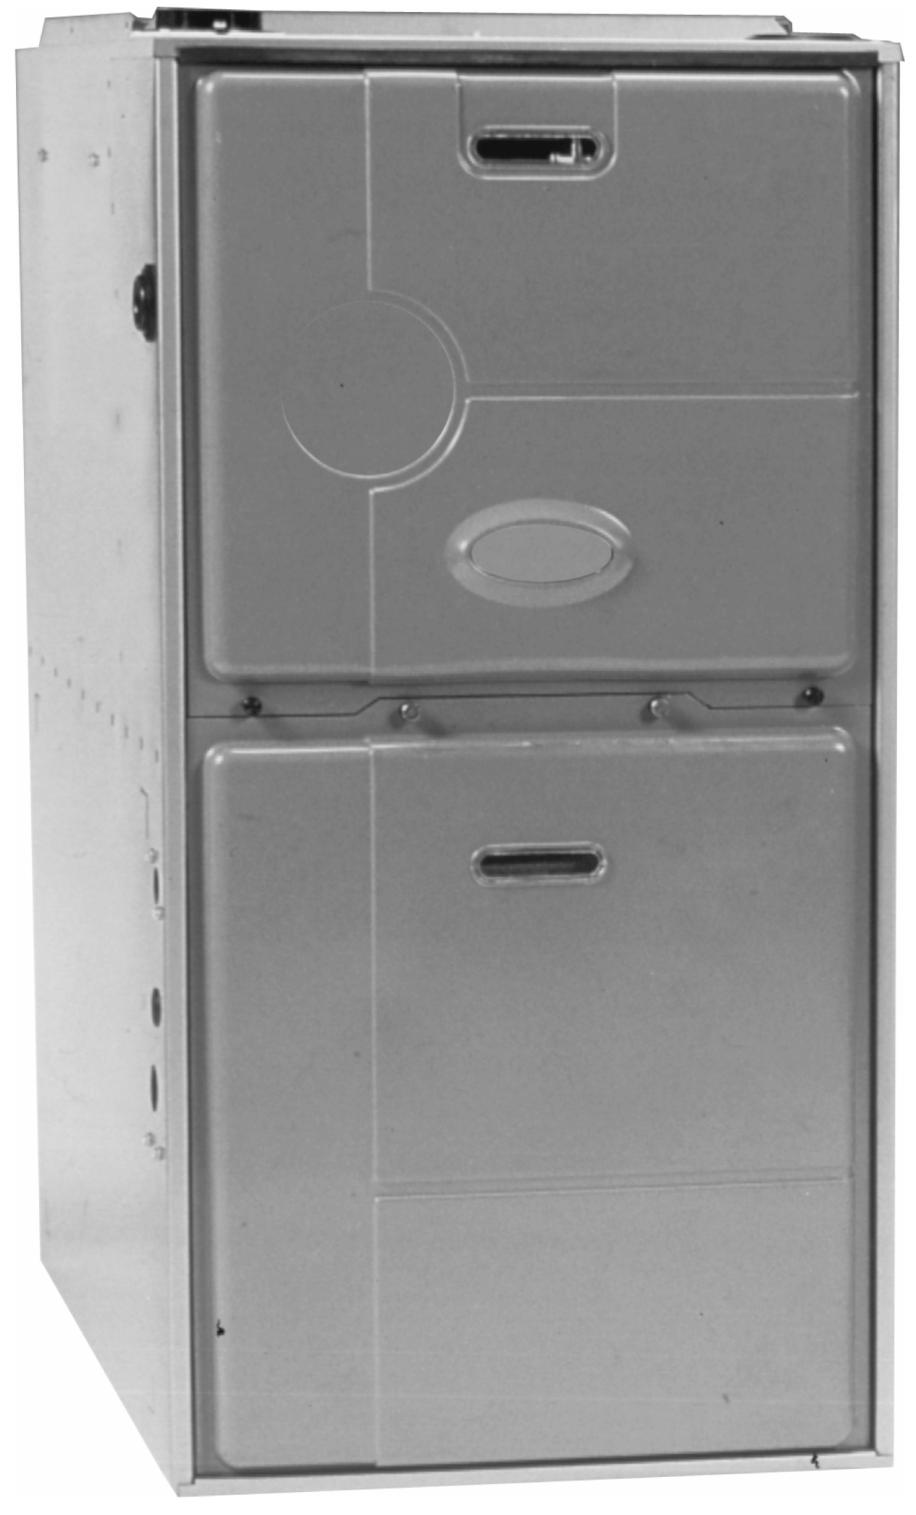 USER S INFORMATION MANUAL FOR COMMUNICATING MODULATING CONDENSING GAS FURNACES Recognize this symbol as an indication of Important Safety Information IF THE INFORMATION IN THESE INSTRUCTIONS IS NOT